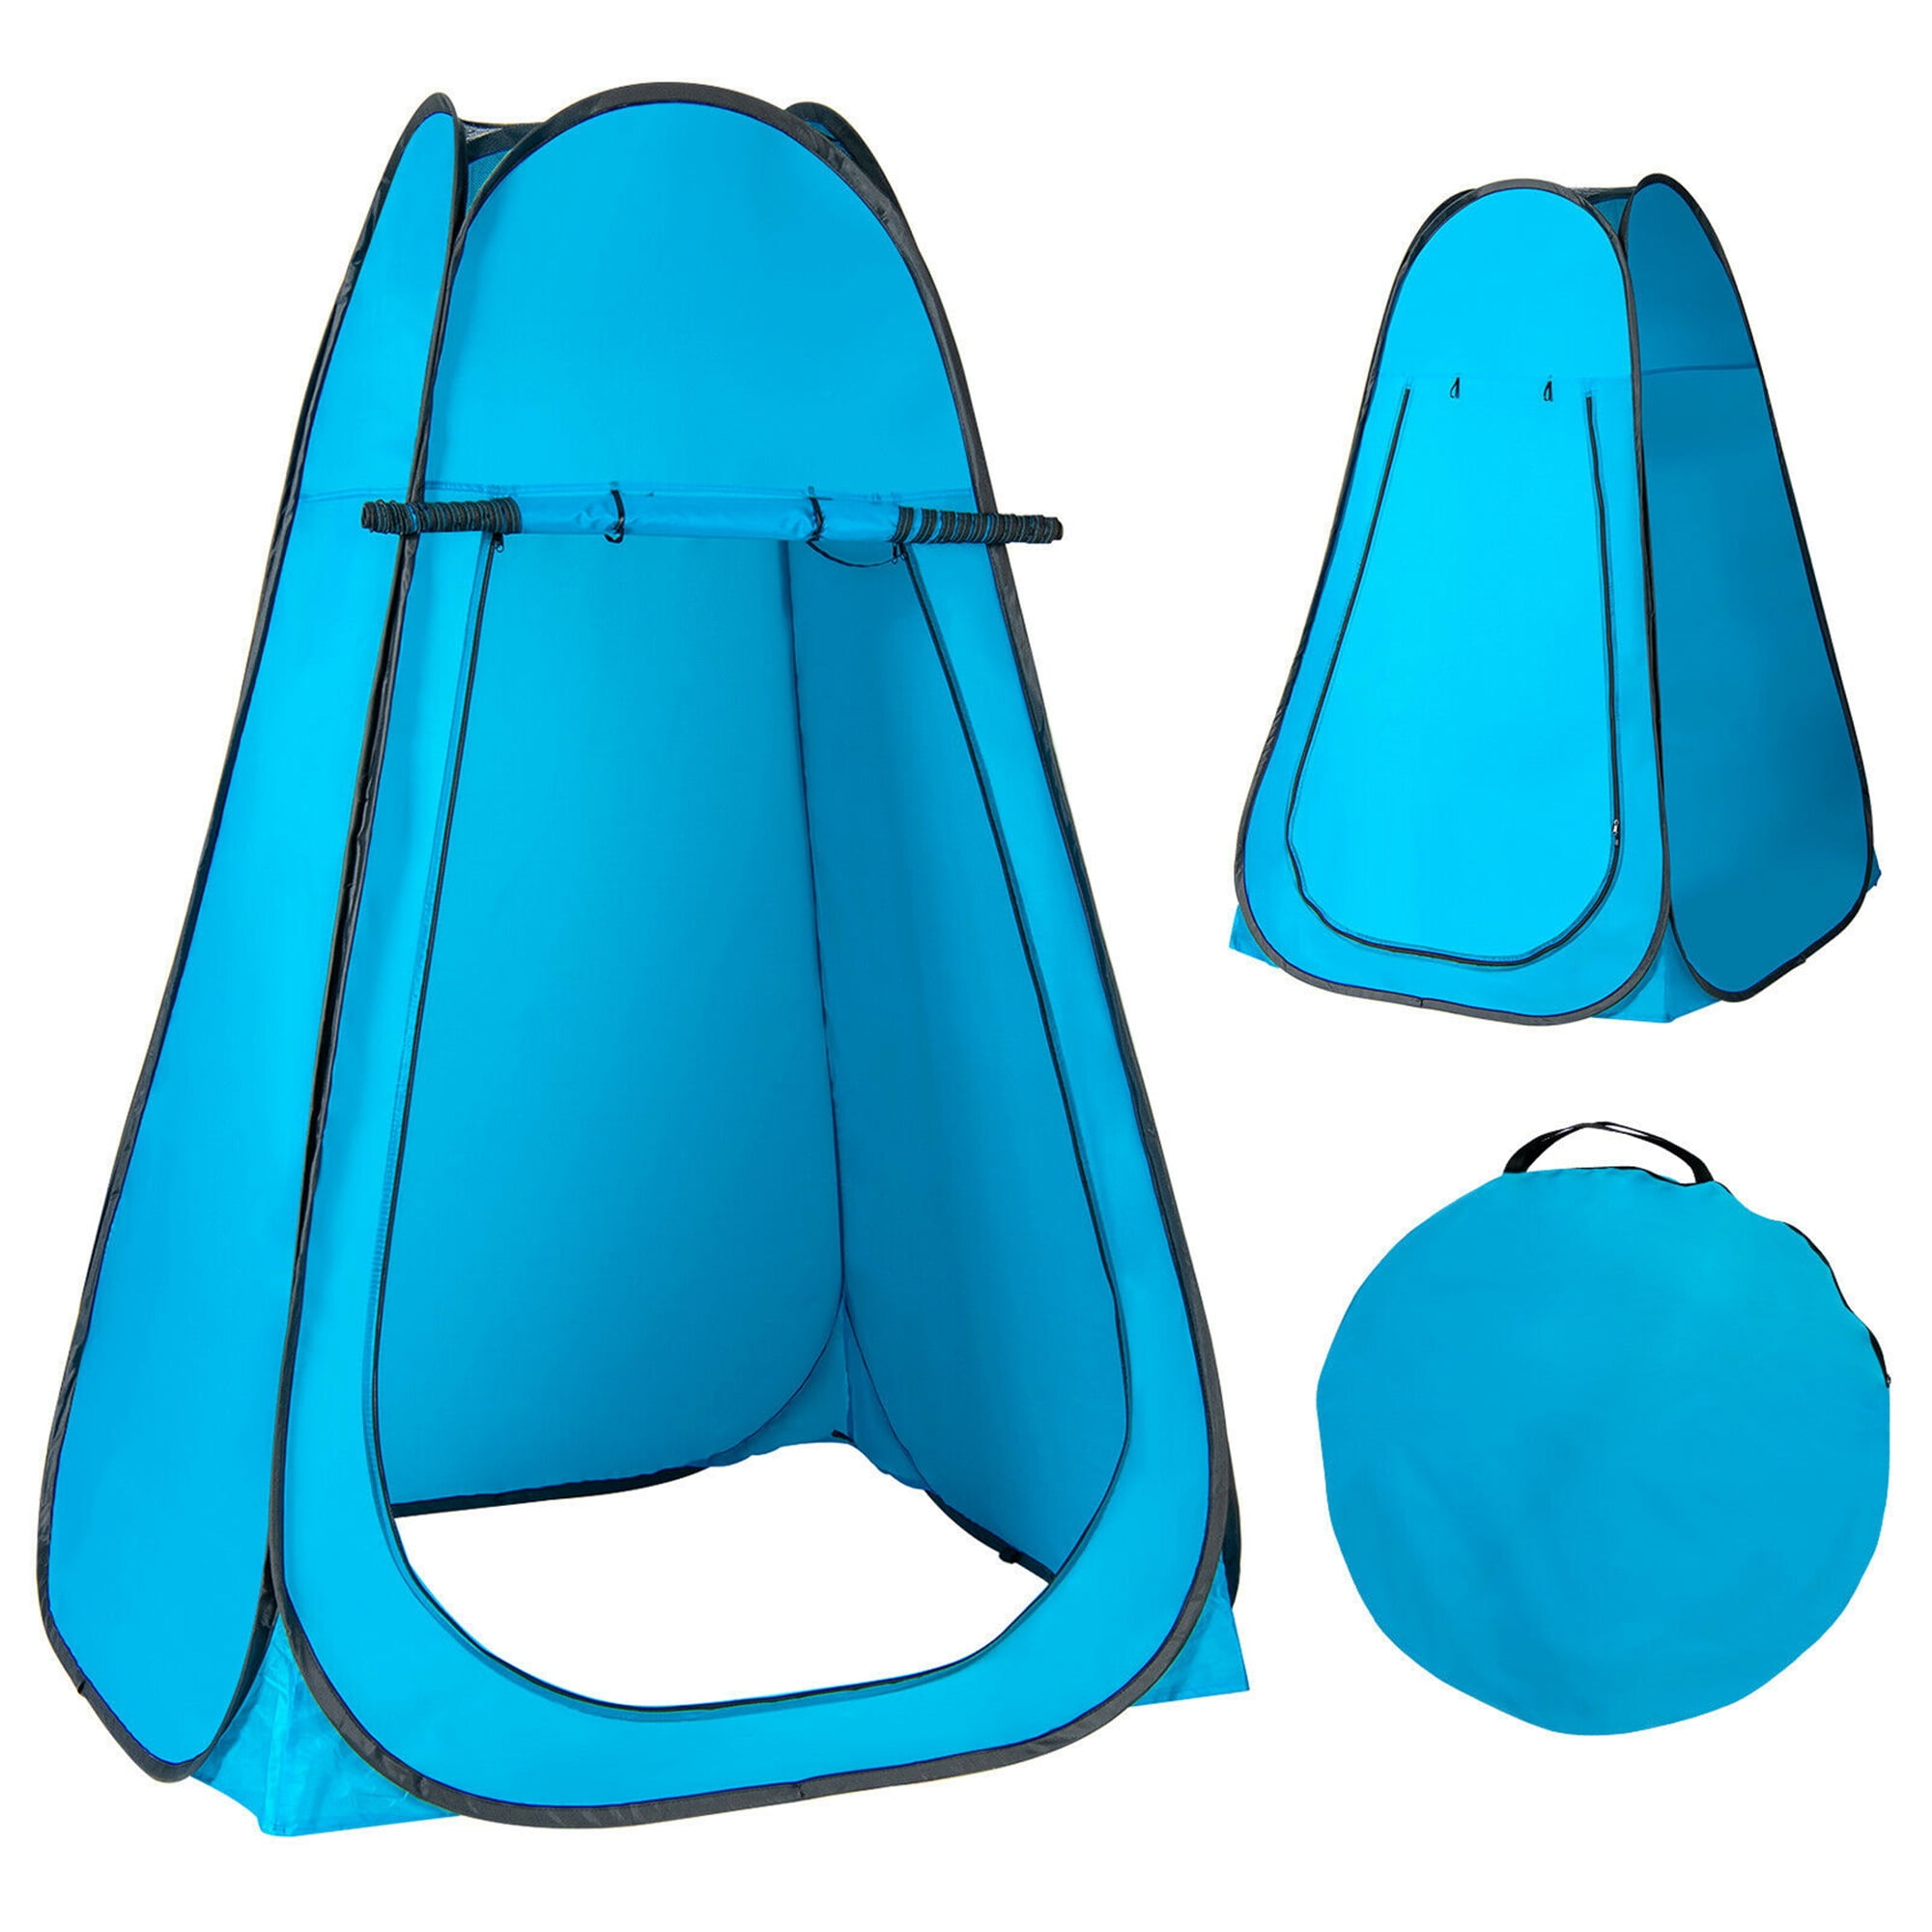 Outdoor Portable Pop-Up Camping Privacy Tent Toilet Changing Room Shower Hiking 